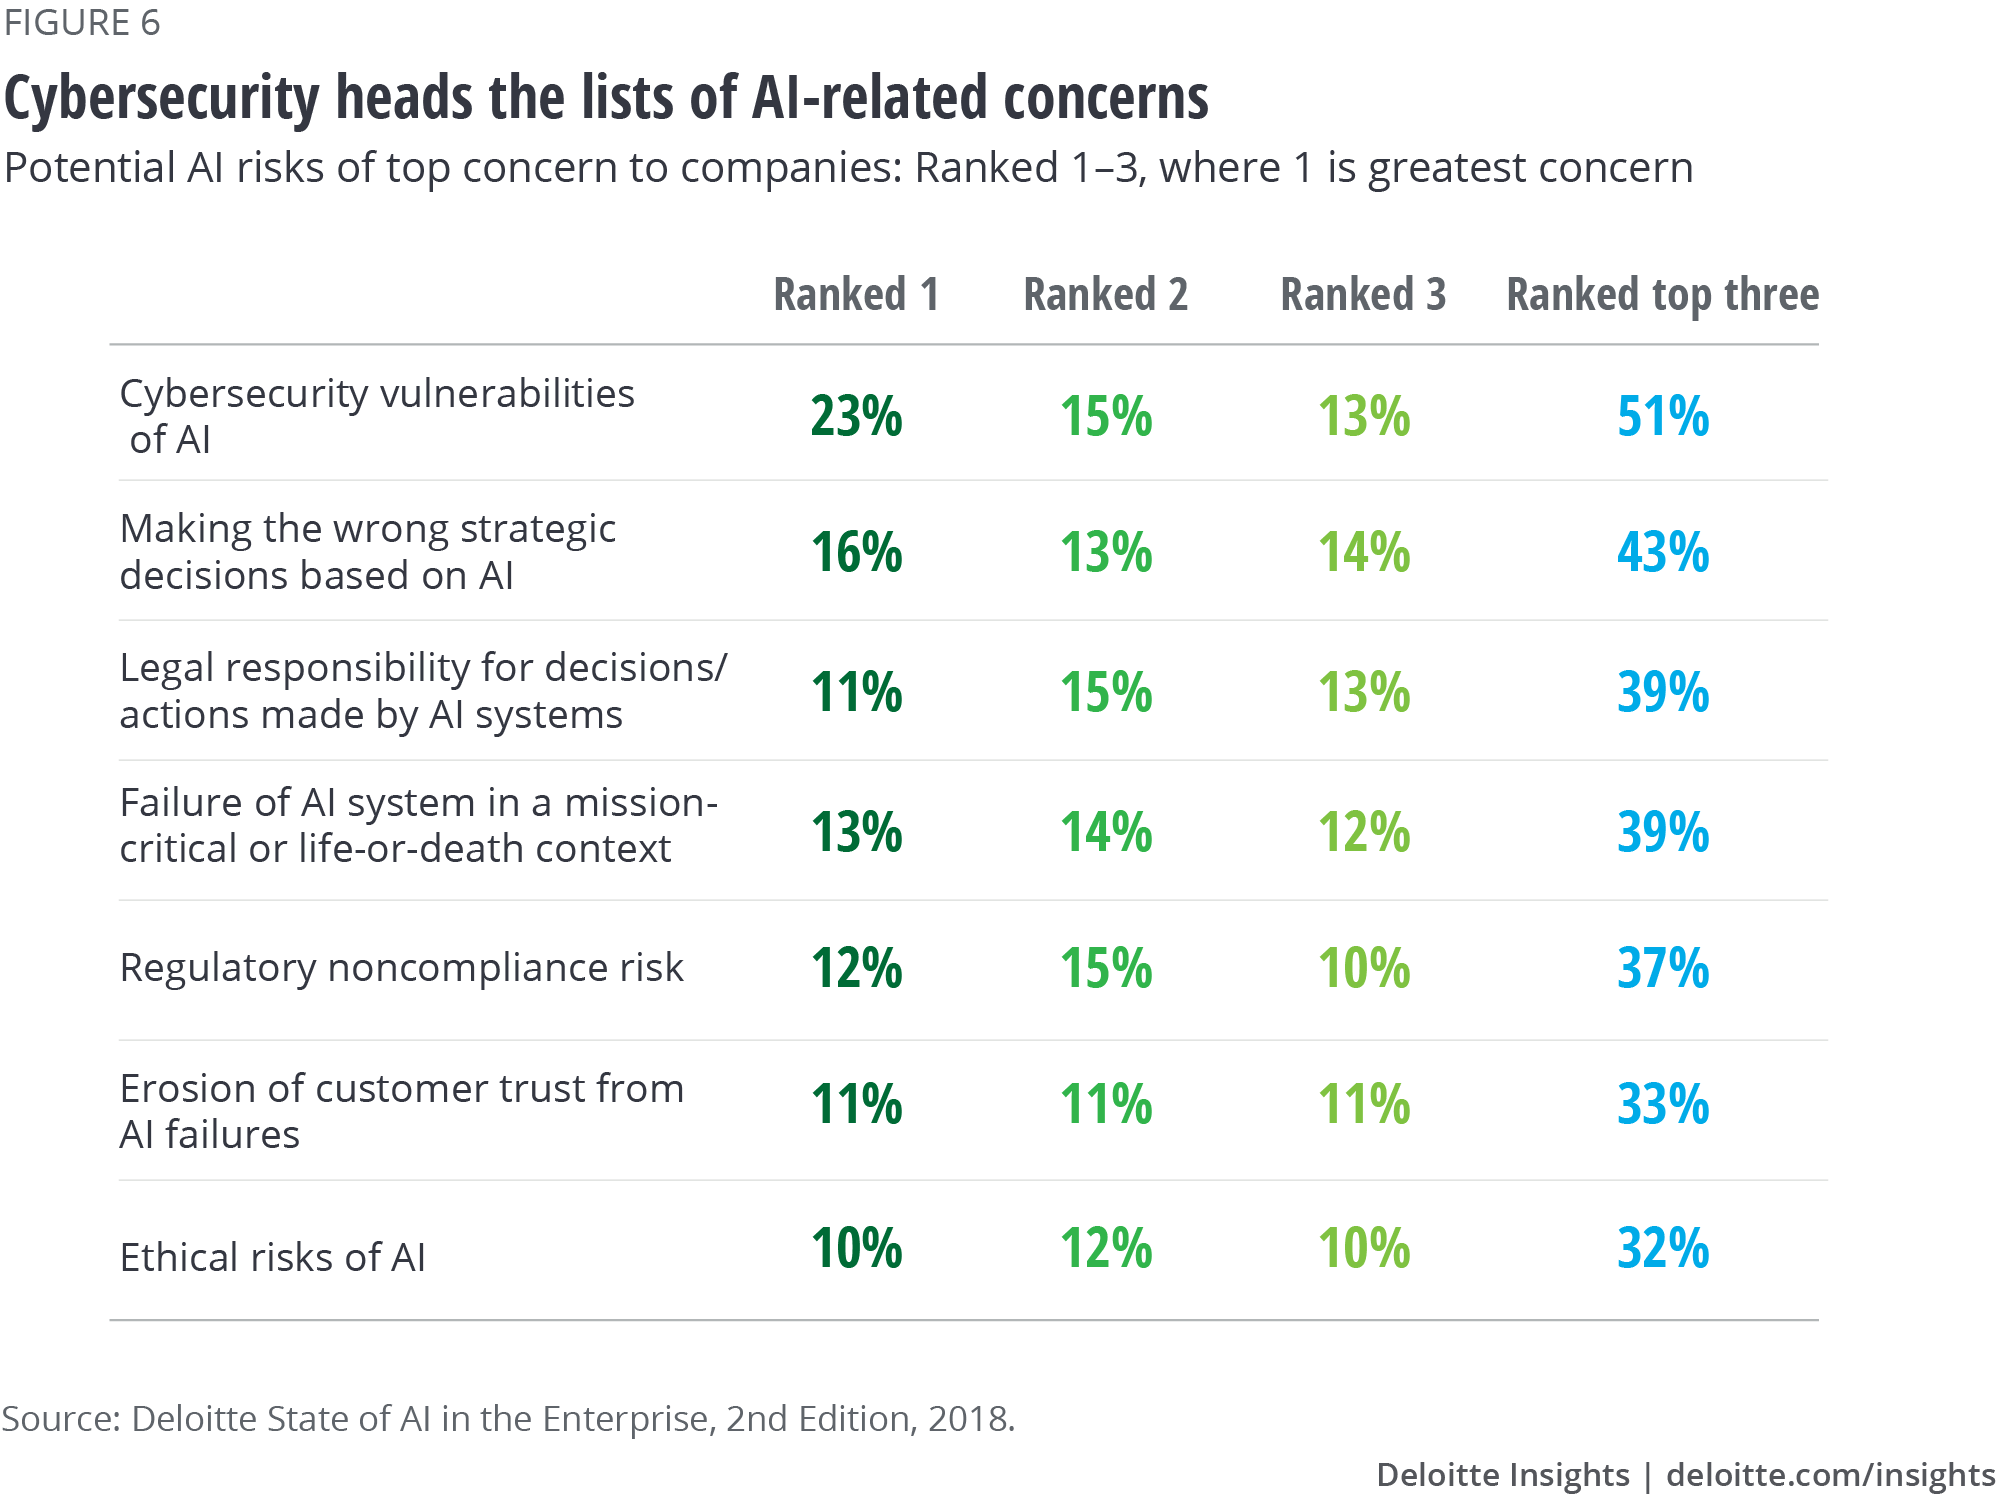 Figure 6. Cybersecurity heads the lists of AI-related concerns